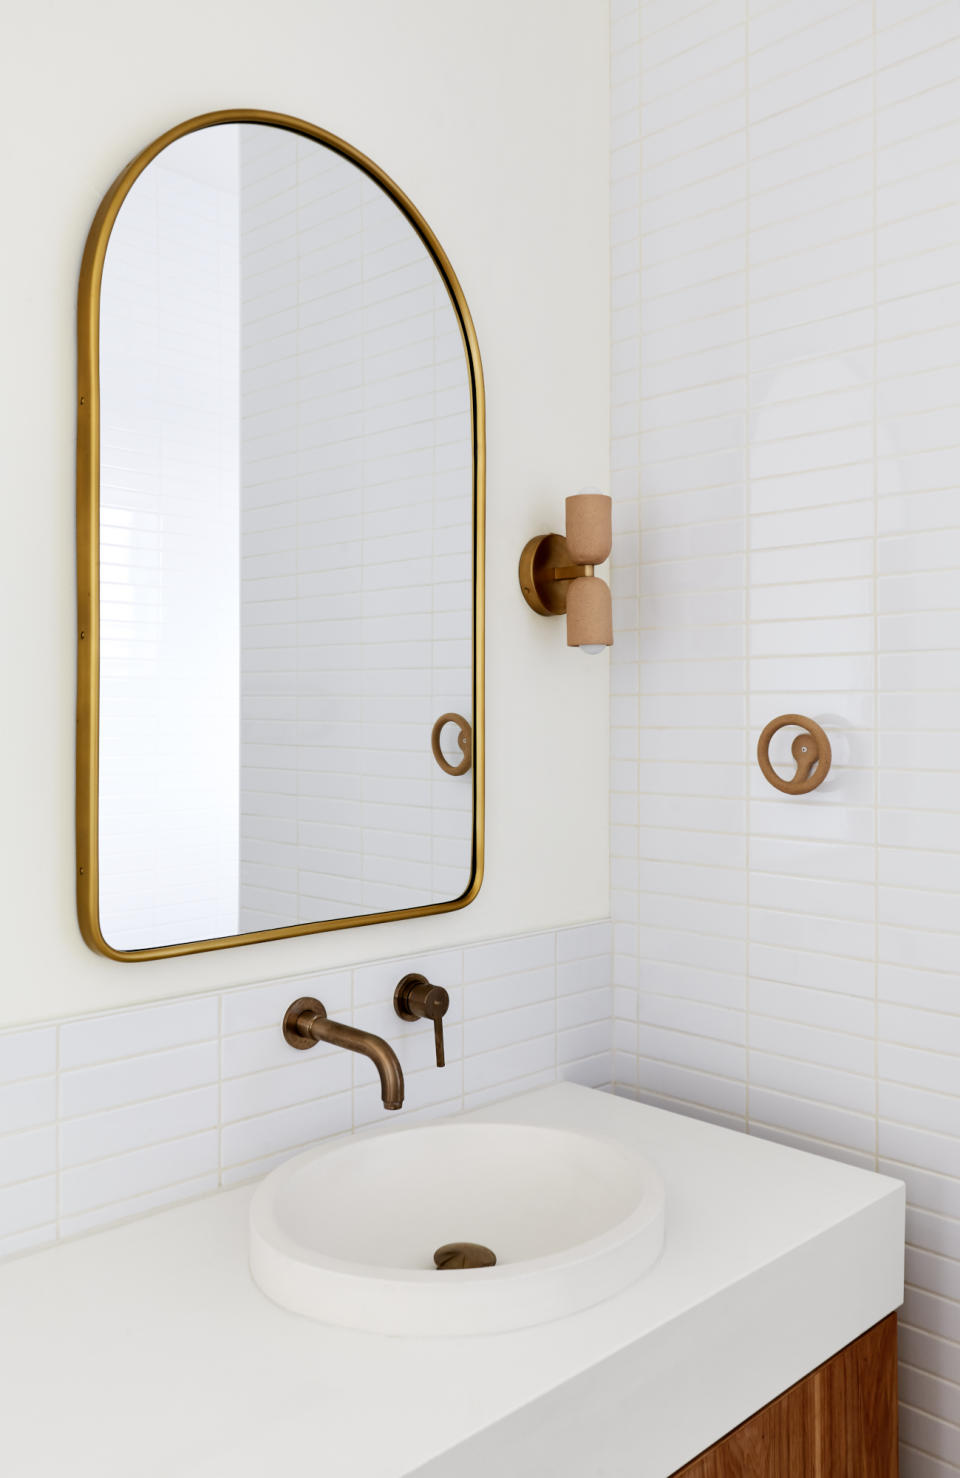 White bathroom with white tiled walls, white countertop, brass tap and mirror and ceramic wall light and towel hook